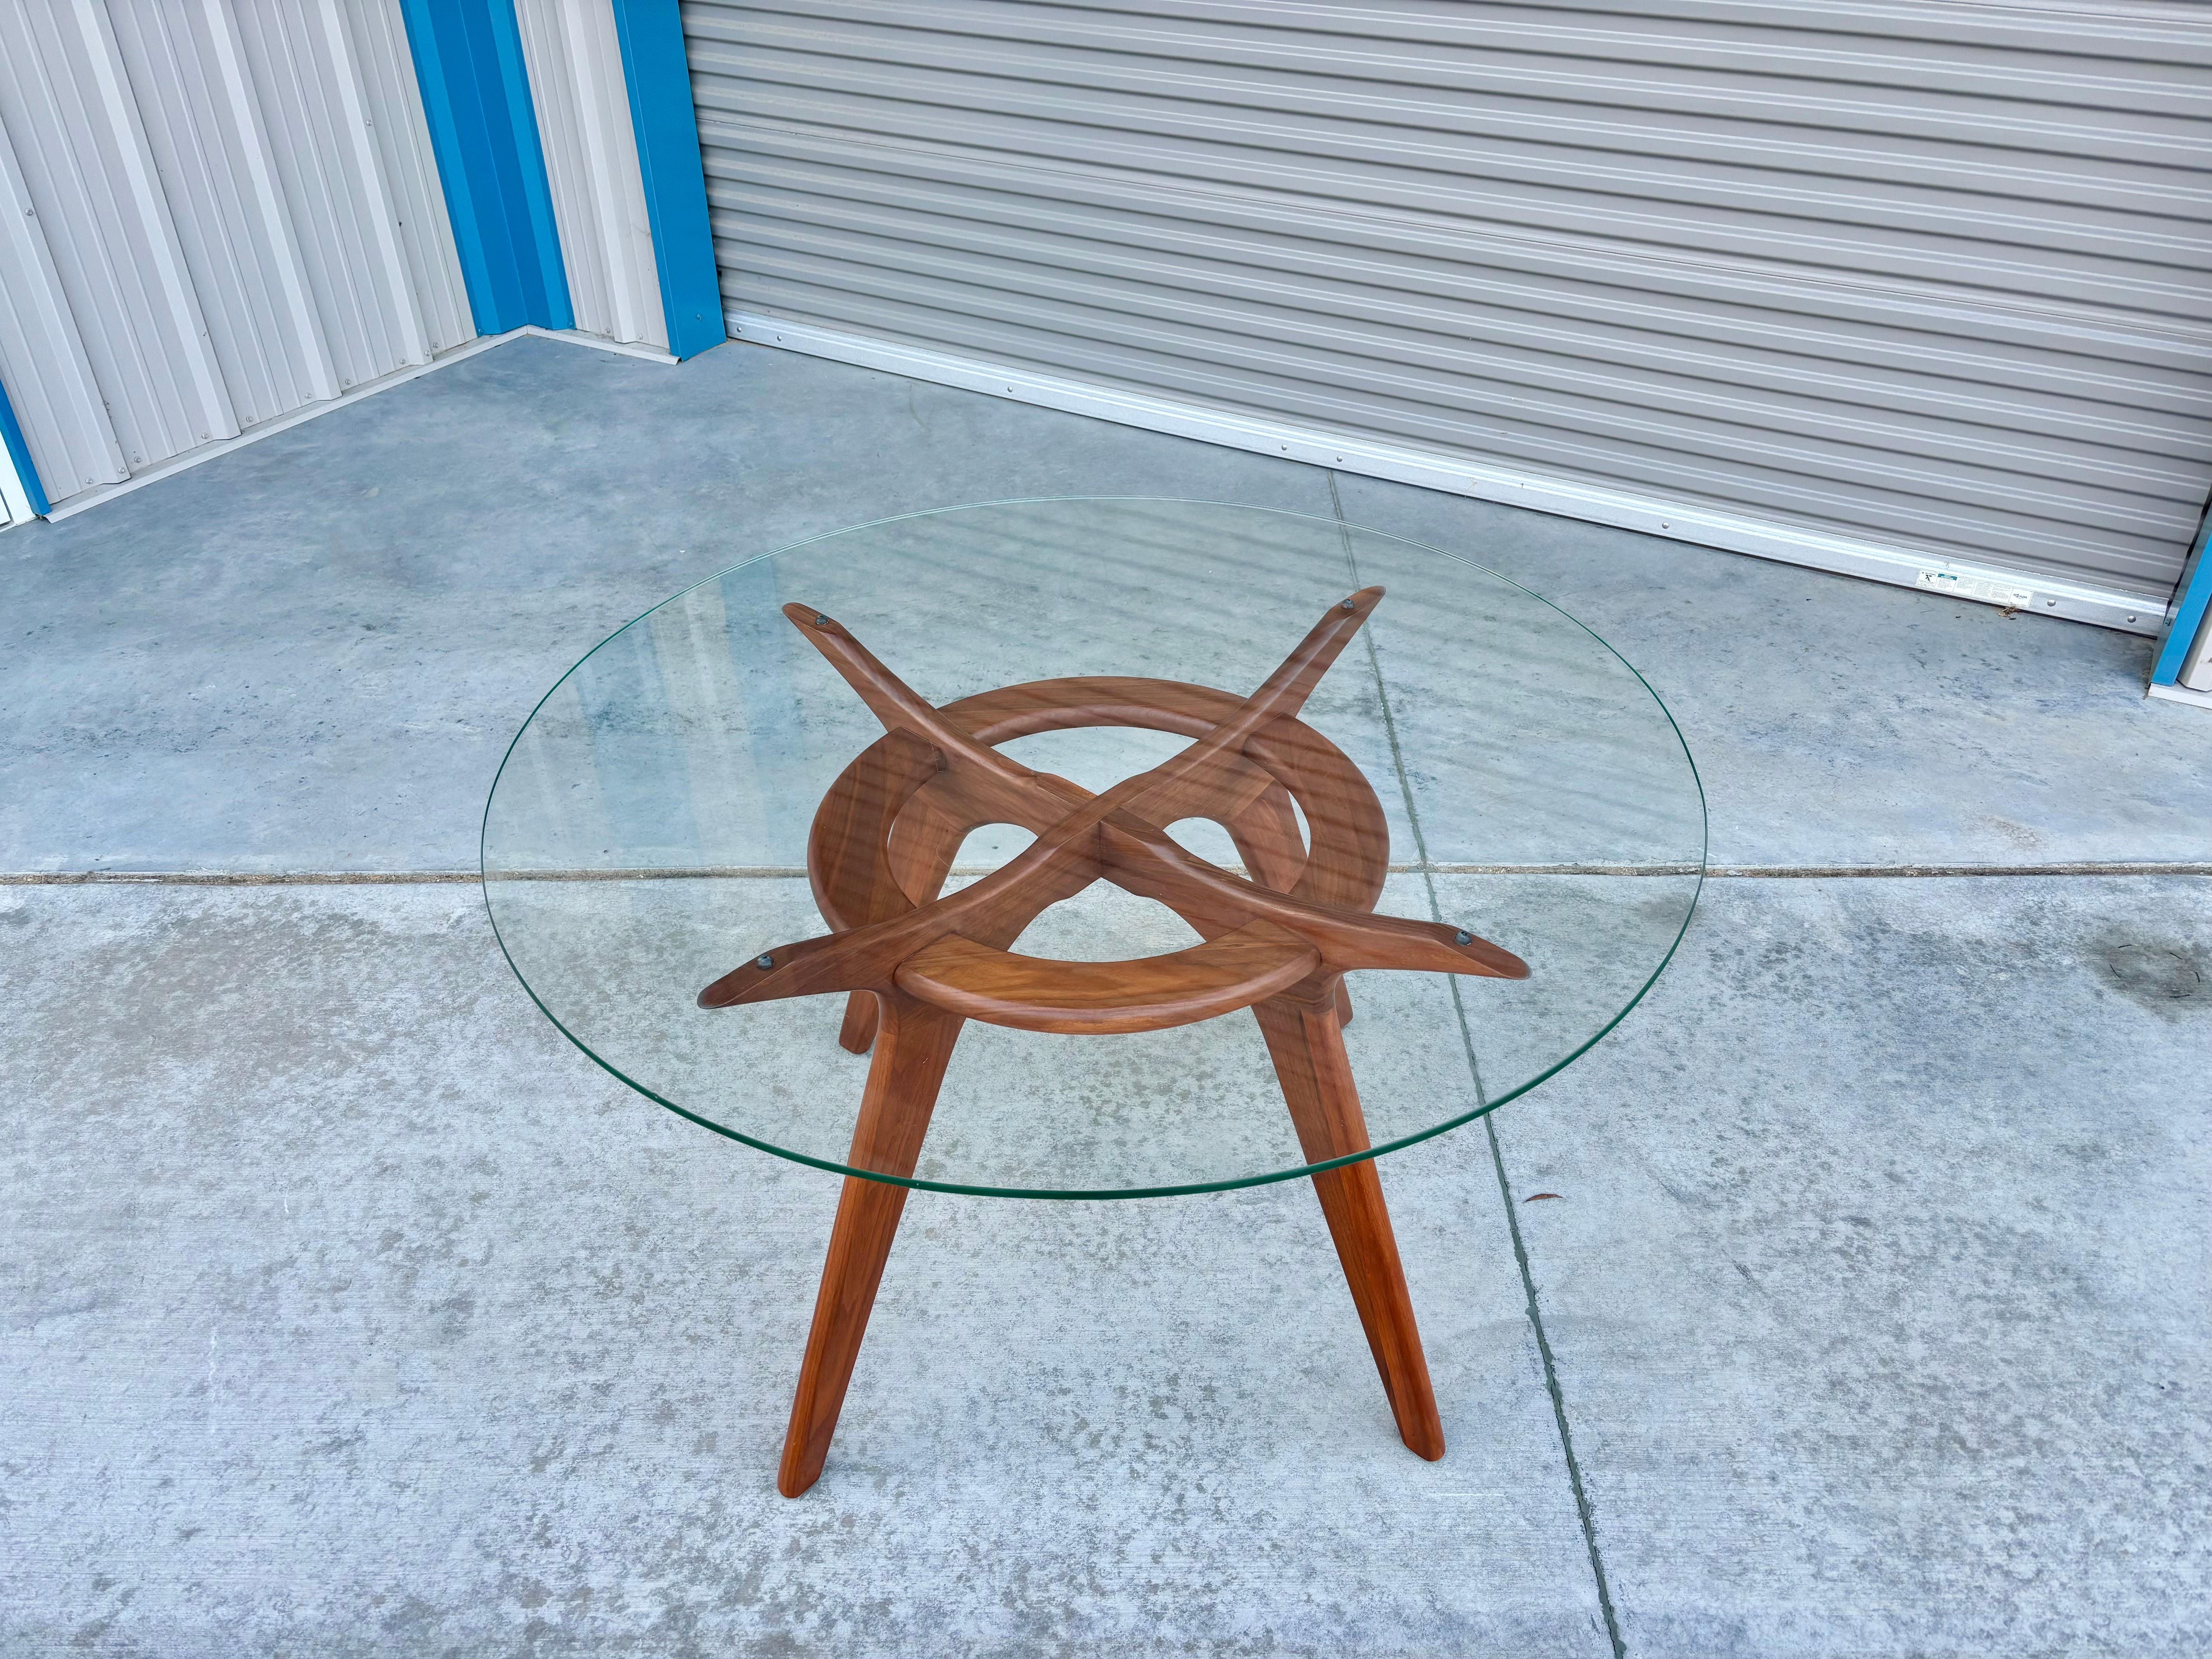 This stunning dining table is a true masterpiece of mid-century design, crafted by the renowned Adrian Pearsall and produced by Craft Associates. The table's exquisite circular glass top is elegantly supported by a sturdy walnut frame base,